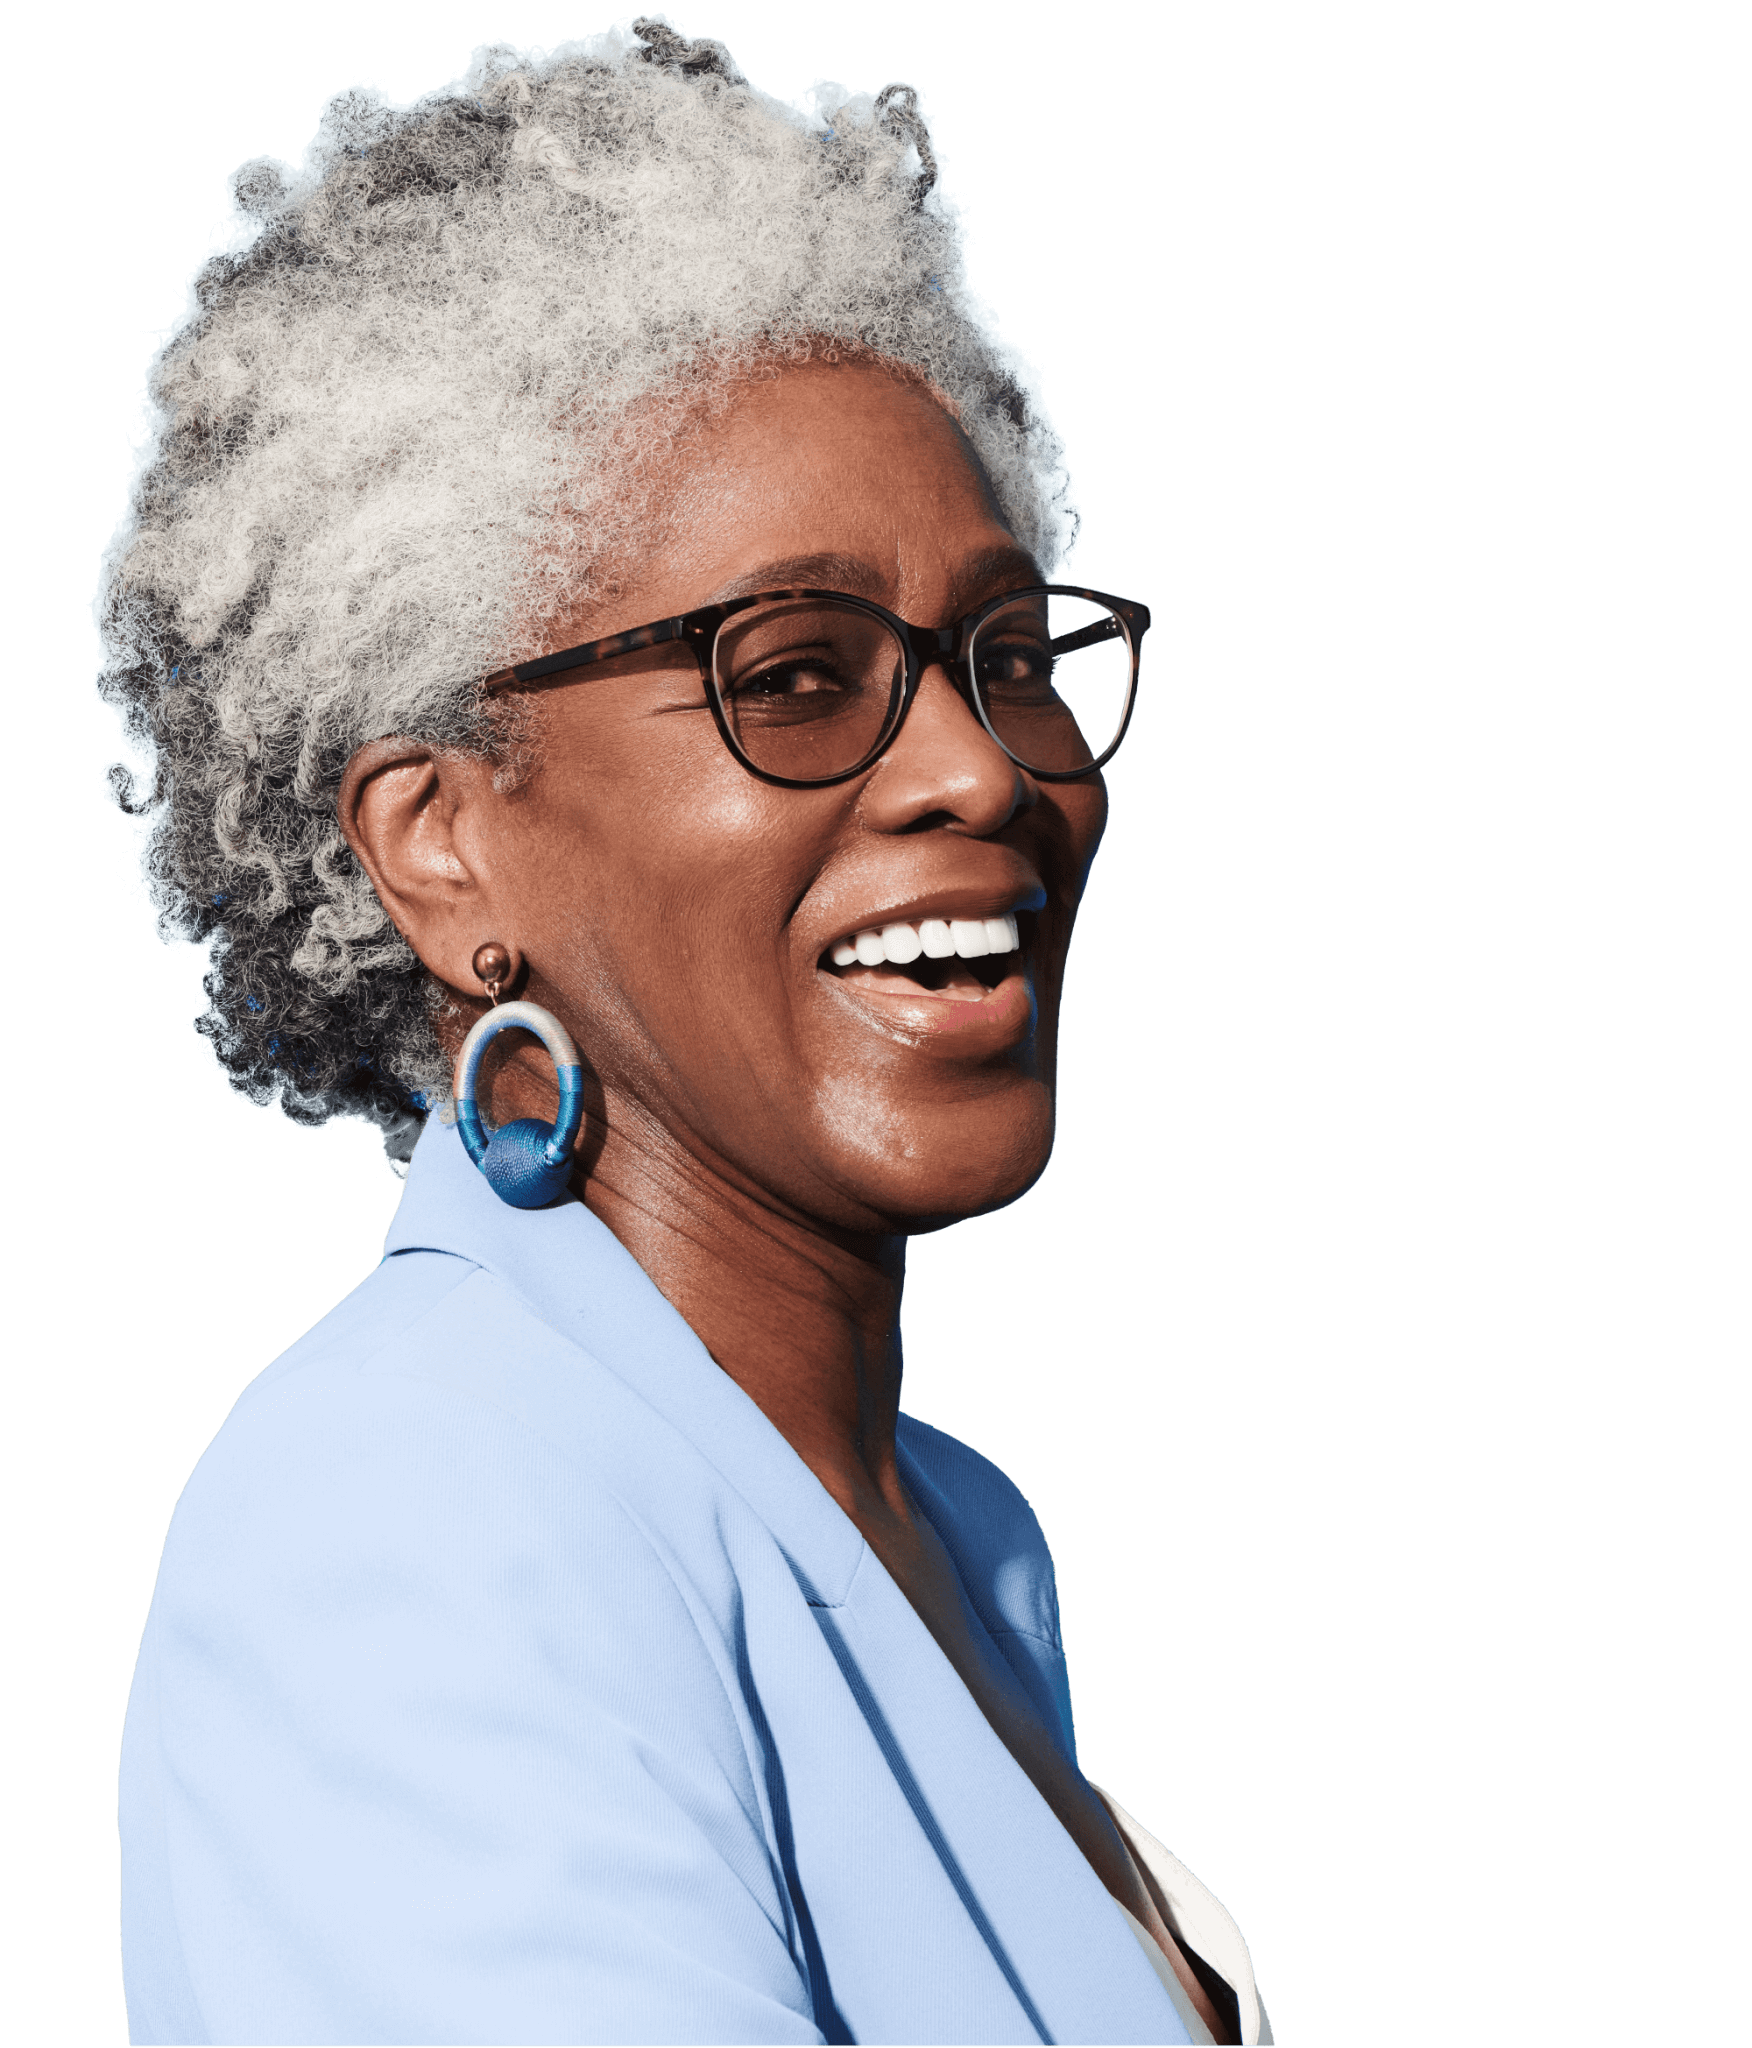 Lady smiling who has gray hair and wearing glasses.